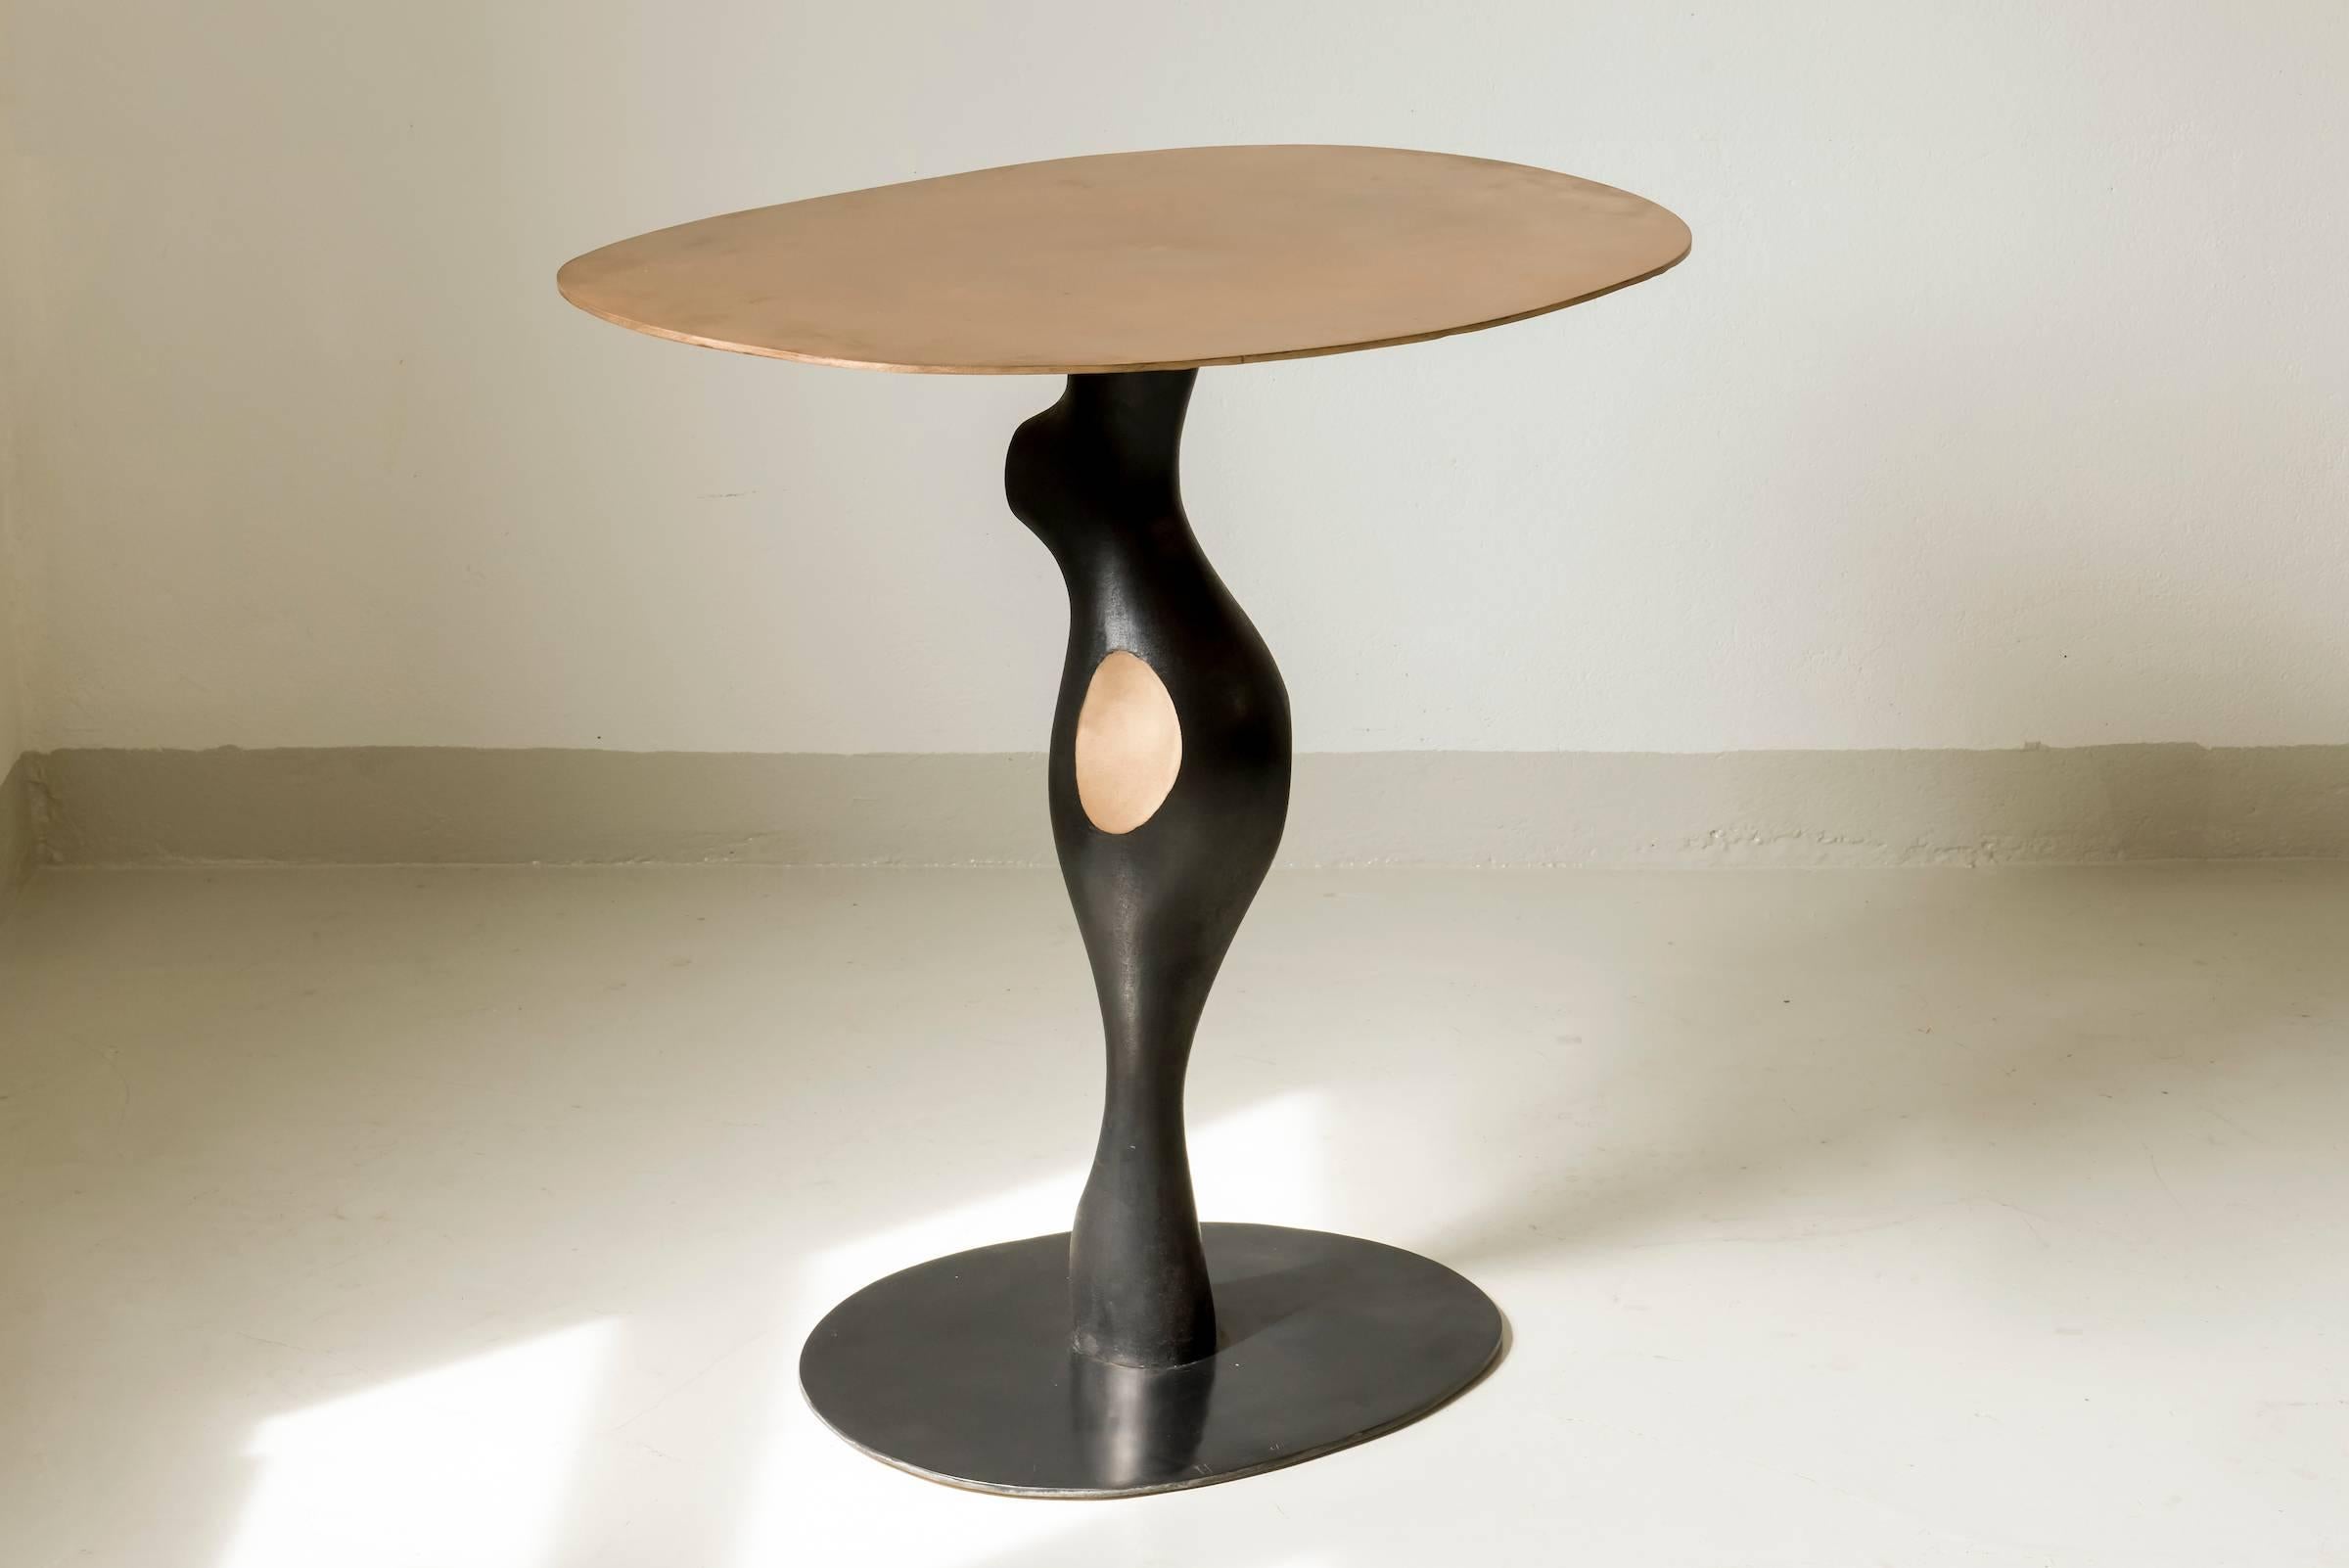 This sculpture/ gueridon or pedestal table was created by Jacques Jarrige in 2017. He sculpted it in wood then sand casted it in bronze. This sculpture table seems to be in movement.
The base has a black patina, the central has a black patina with